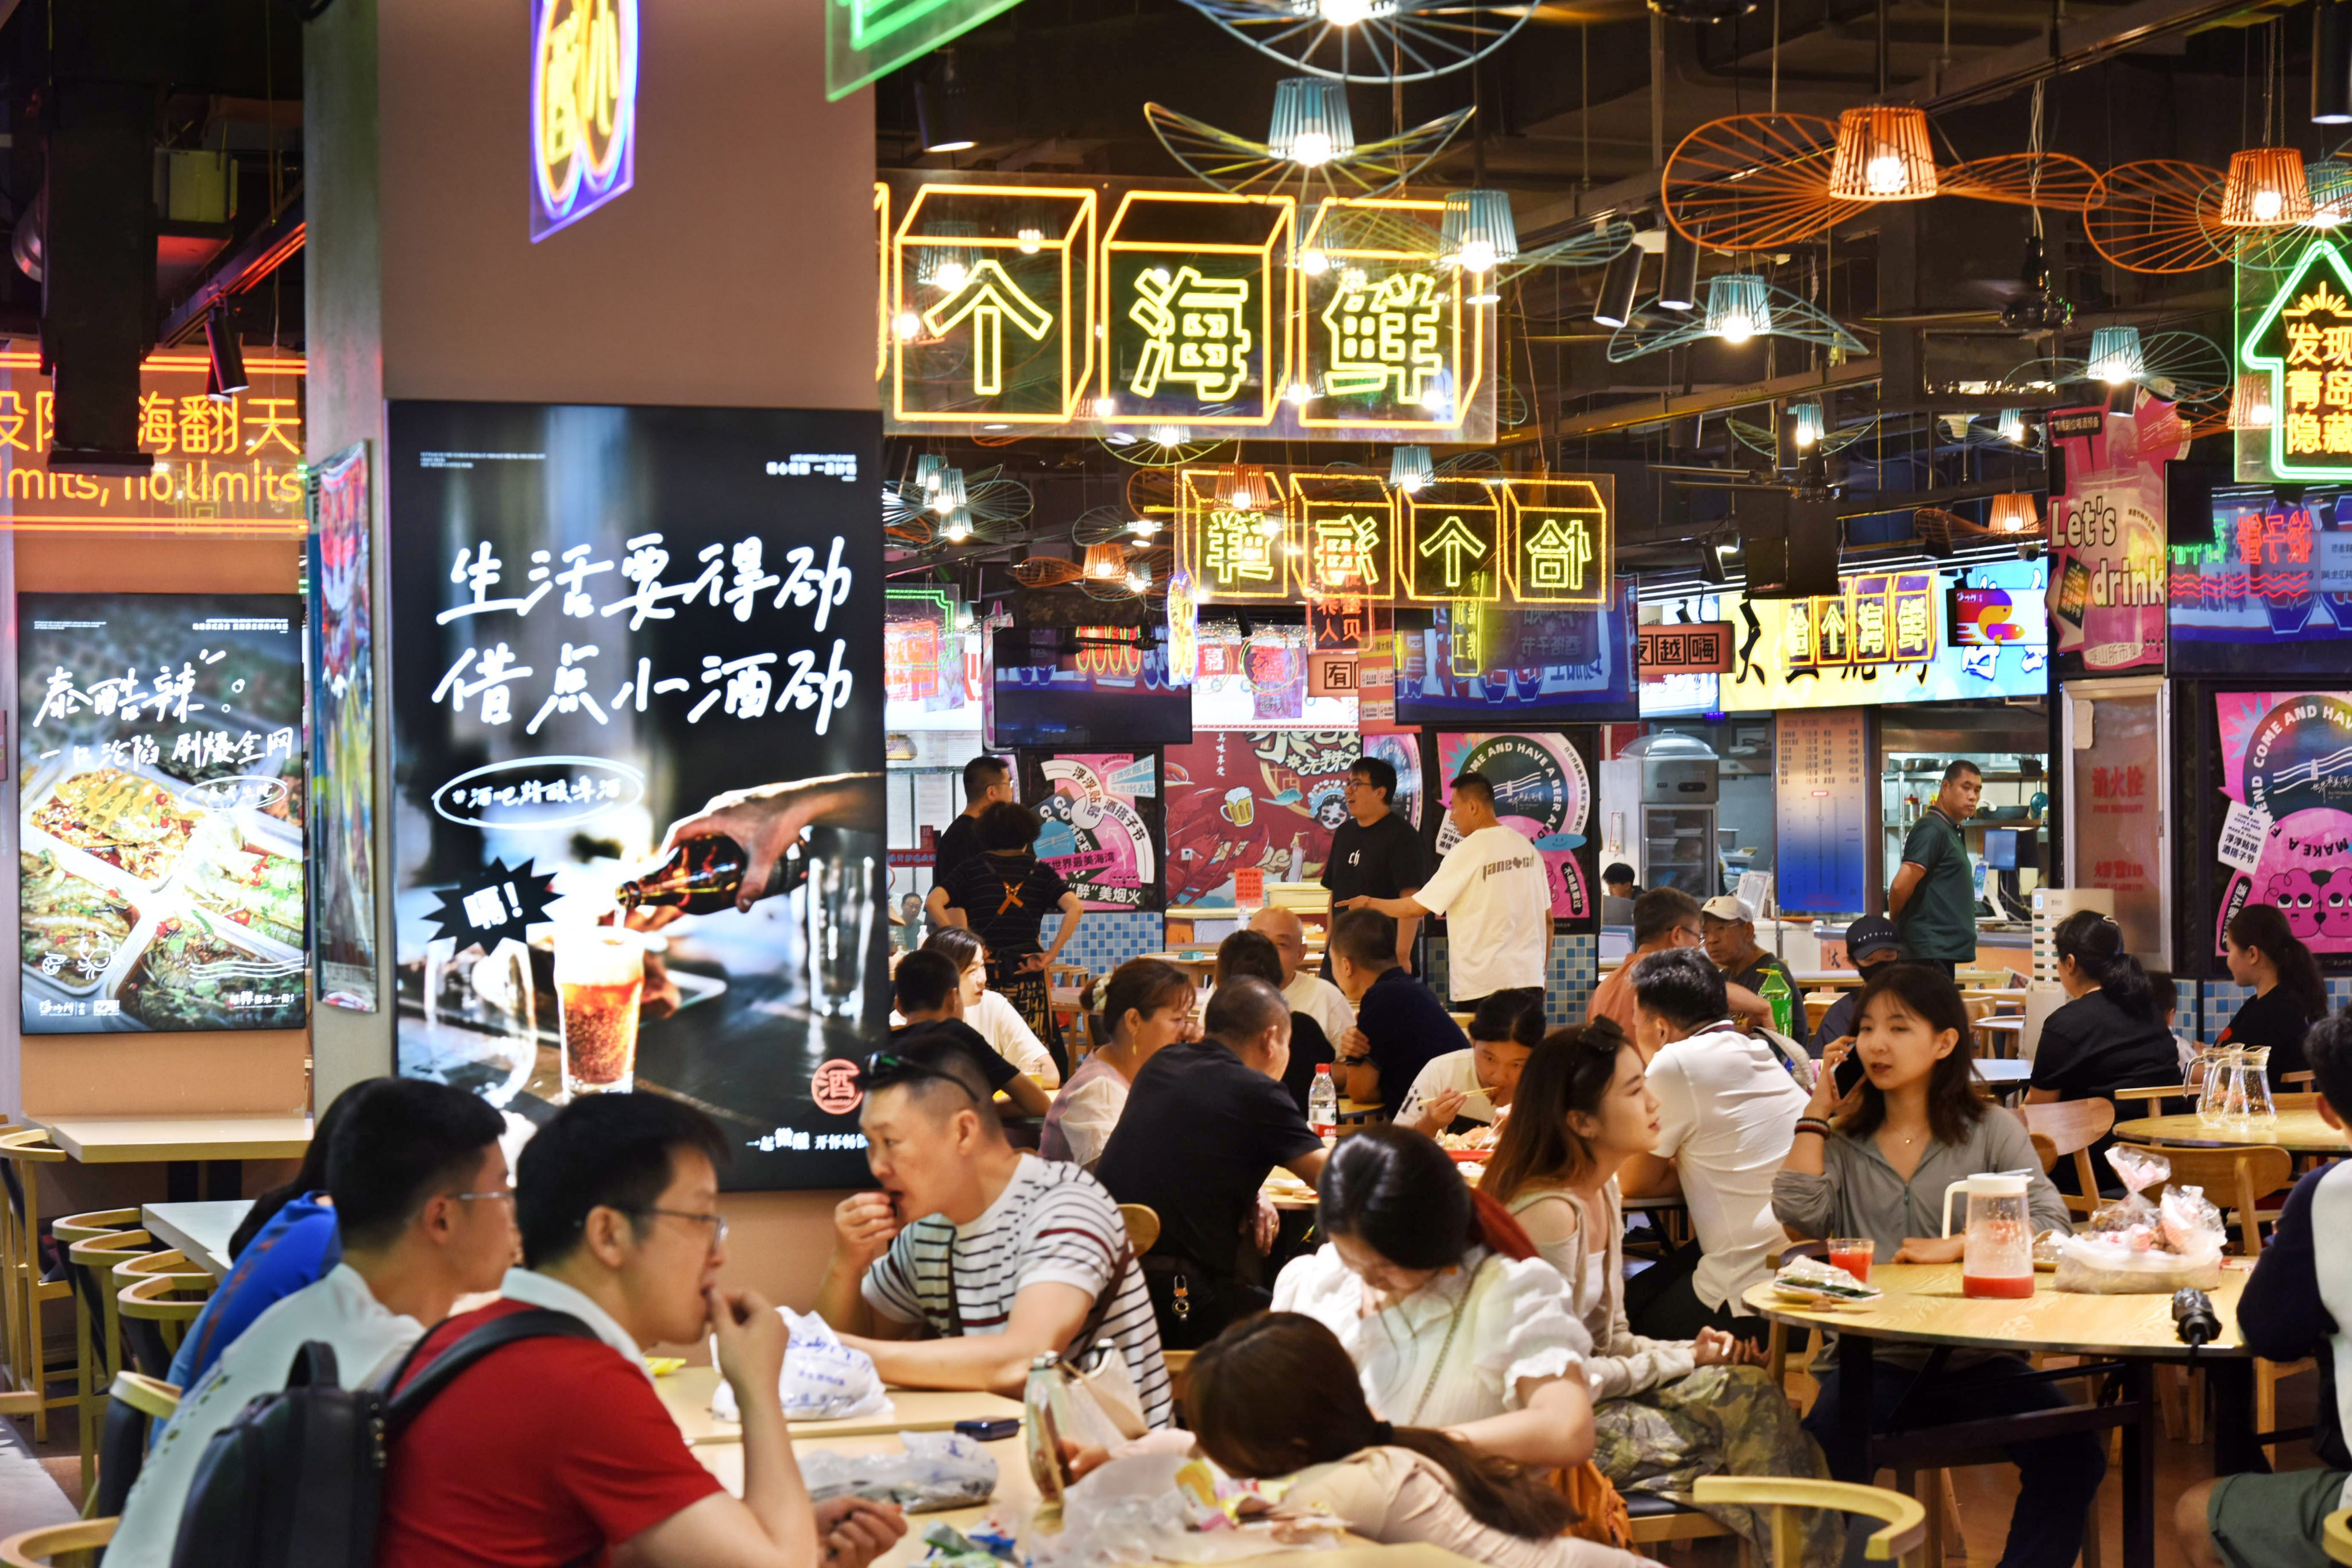 Diners gather at Fushansuo Market in Shinan, Qingdao, in Shandong province, on August 7. China’s overt focus on manufacturing implies keeping the yuan weak, but this reduces the purchasing power of households, shifting wealth from consumers to manufacturing. Photo: Xinhua